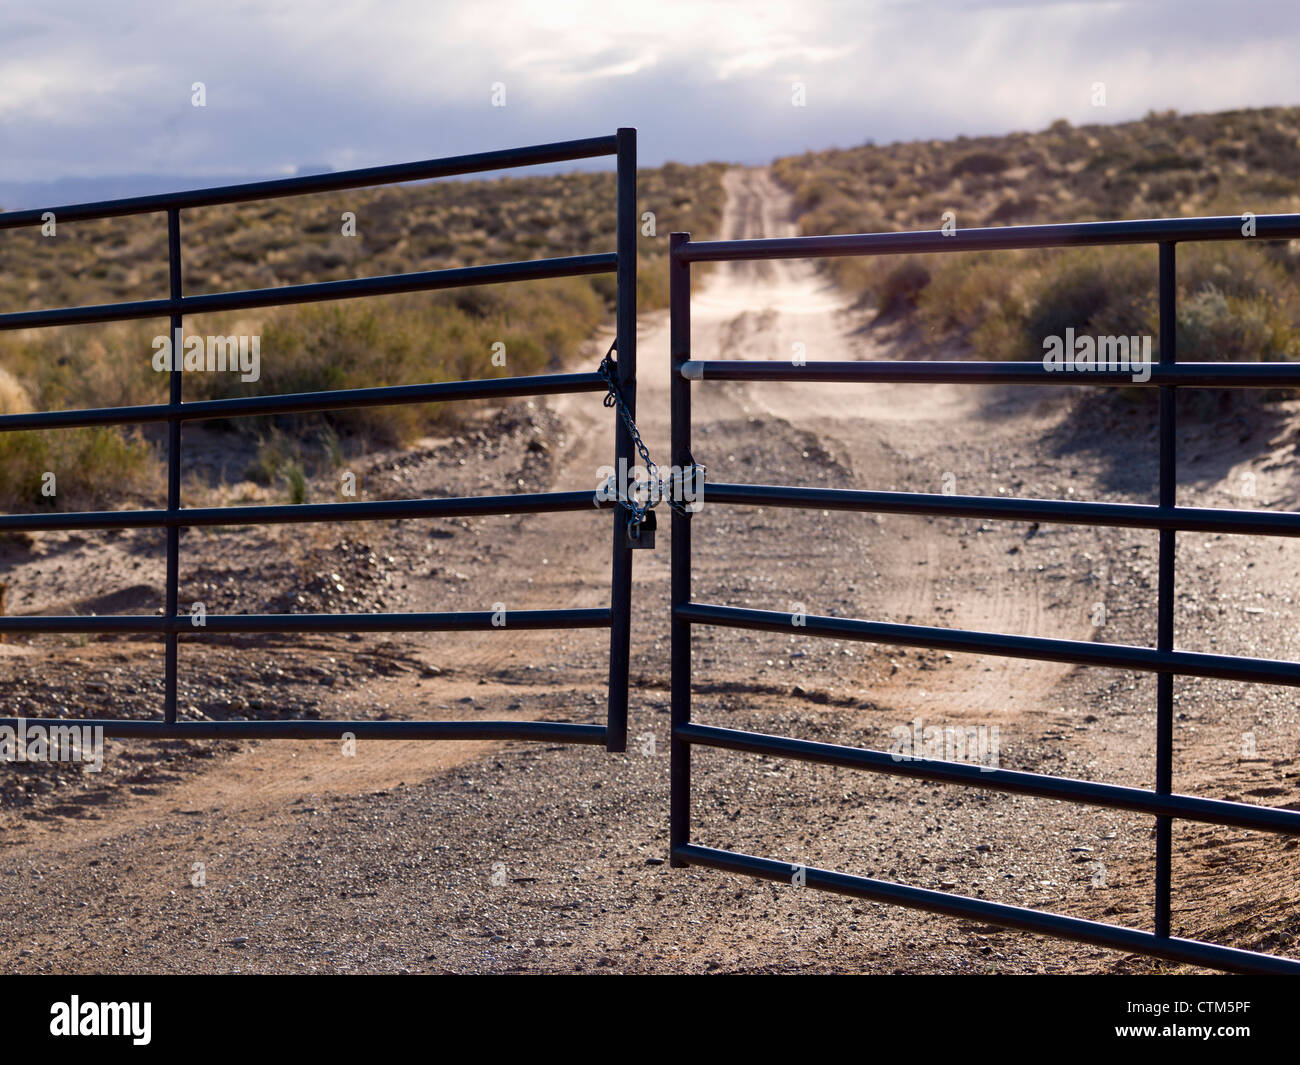 Metal Gate Locked On A Dirt Road In Glen Canyon National Recreation Area; Utah, United States of America Stock Photo